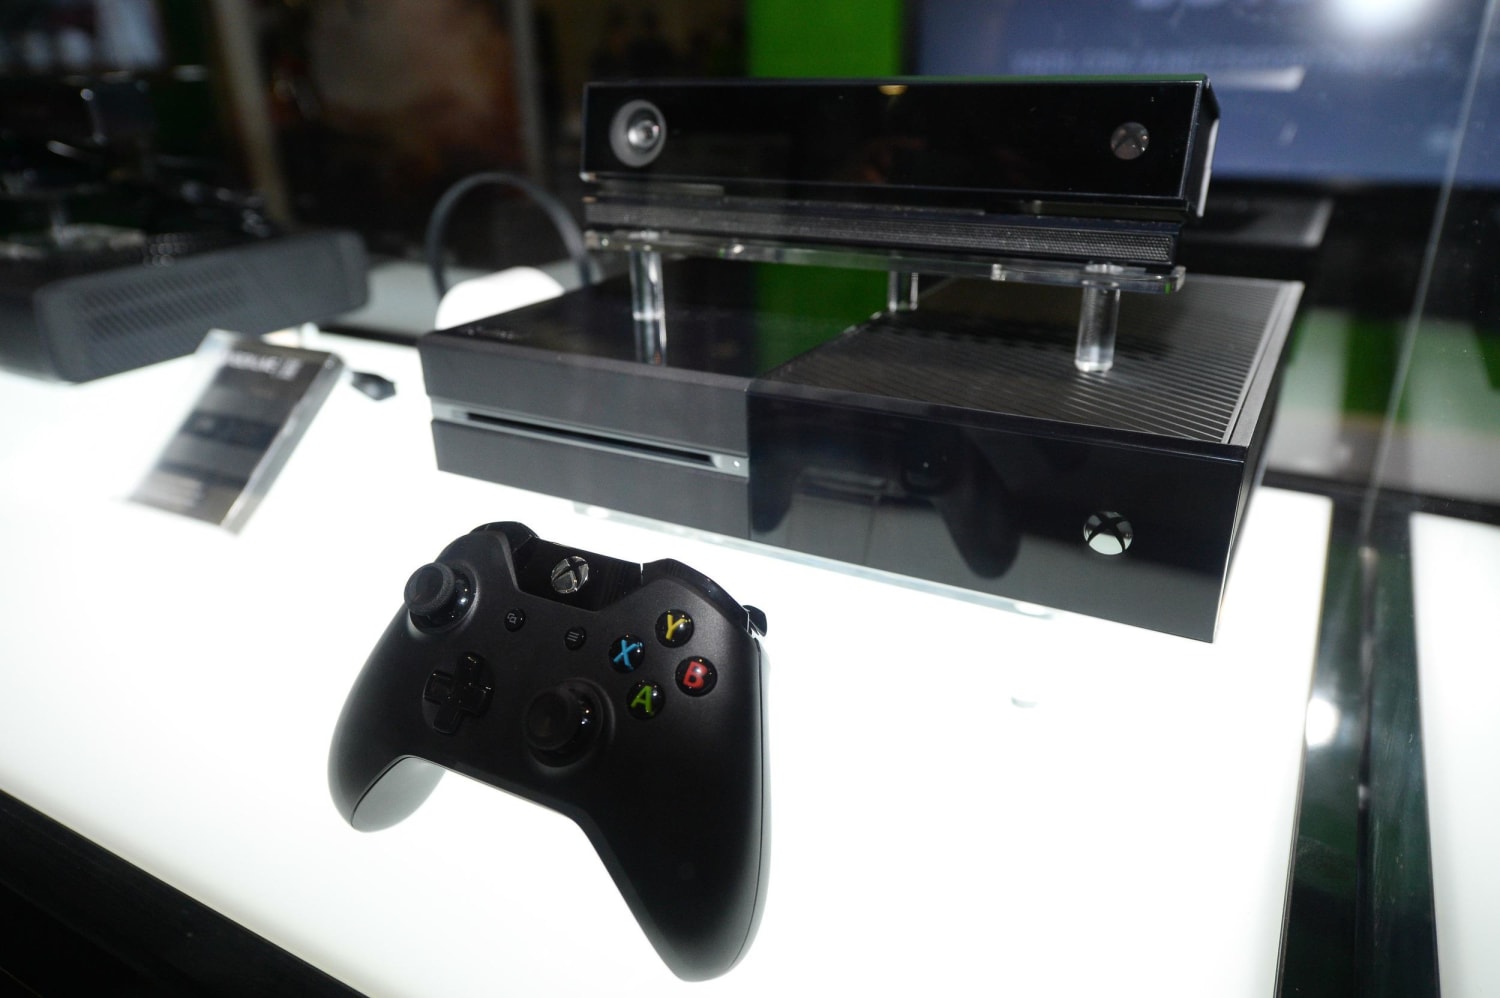 Hacked? Xbox Back Online, While Playstation Down Another Day